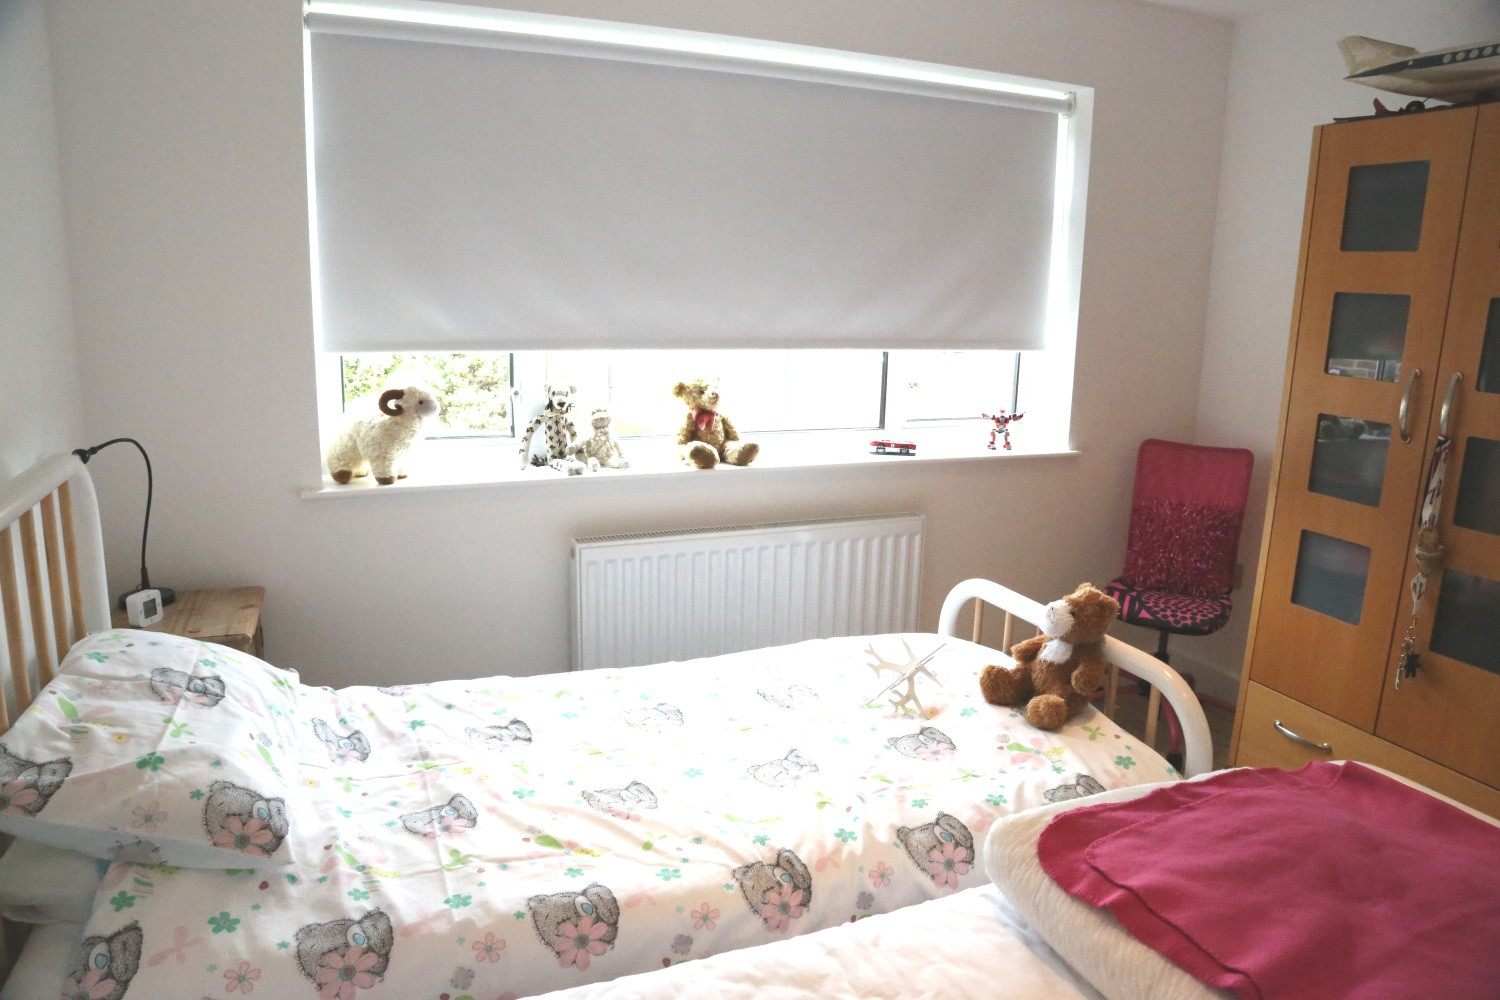 Kids Room Blinds
 What are the best blinds to keep light out